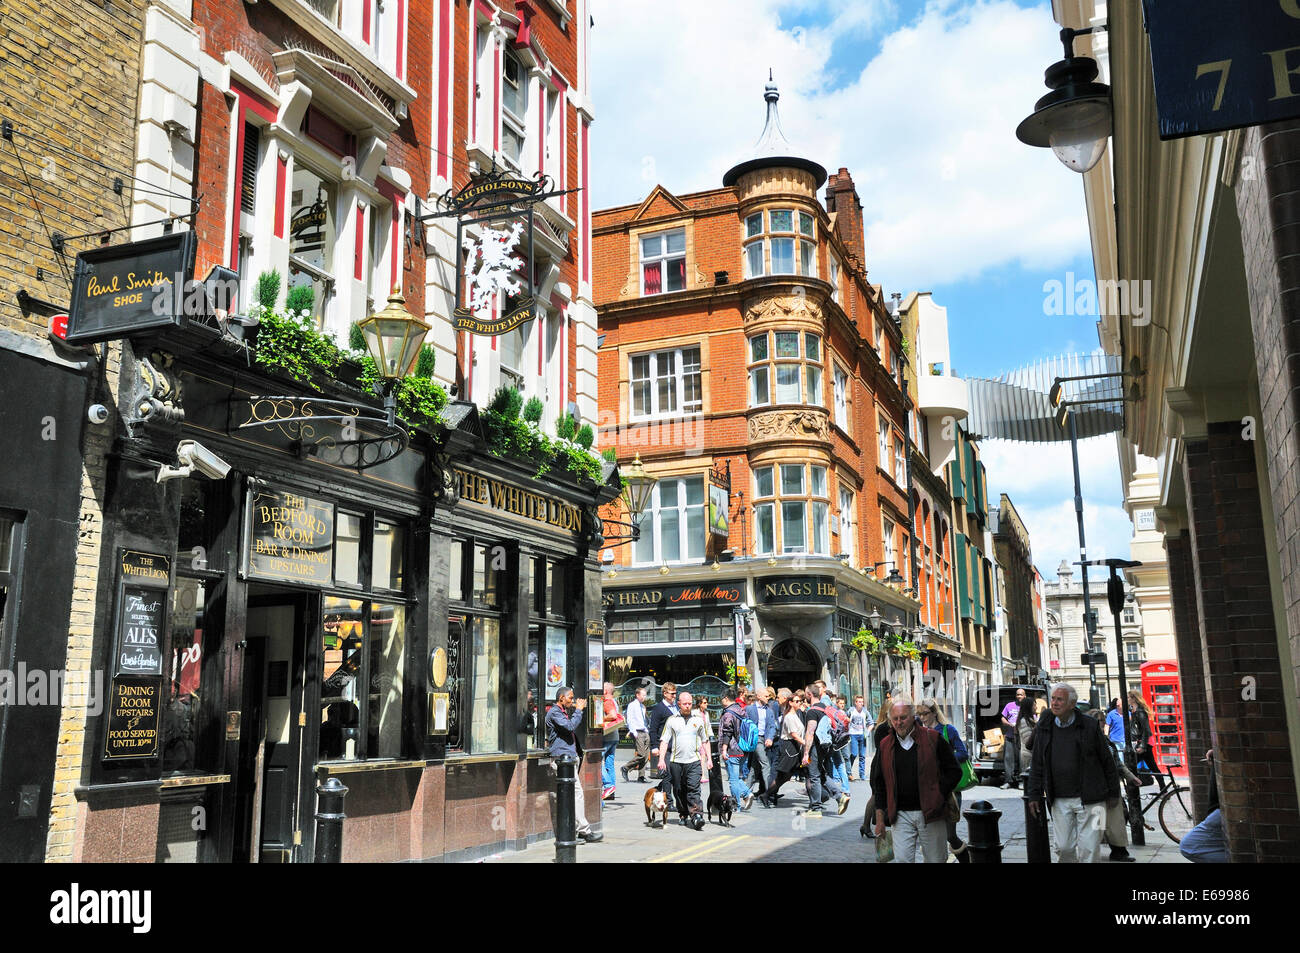 The White Lion and Nags Head pubs in Covent Garden, London, England, UK Stock Photo